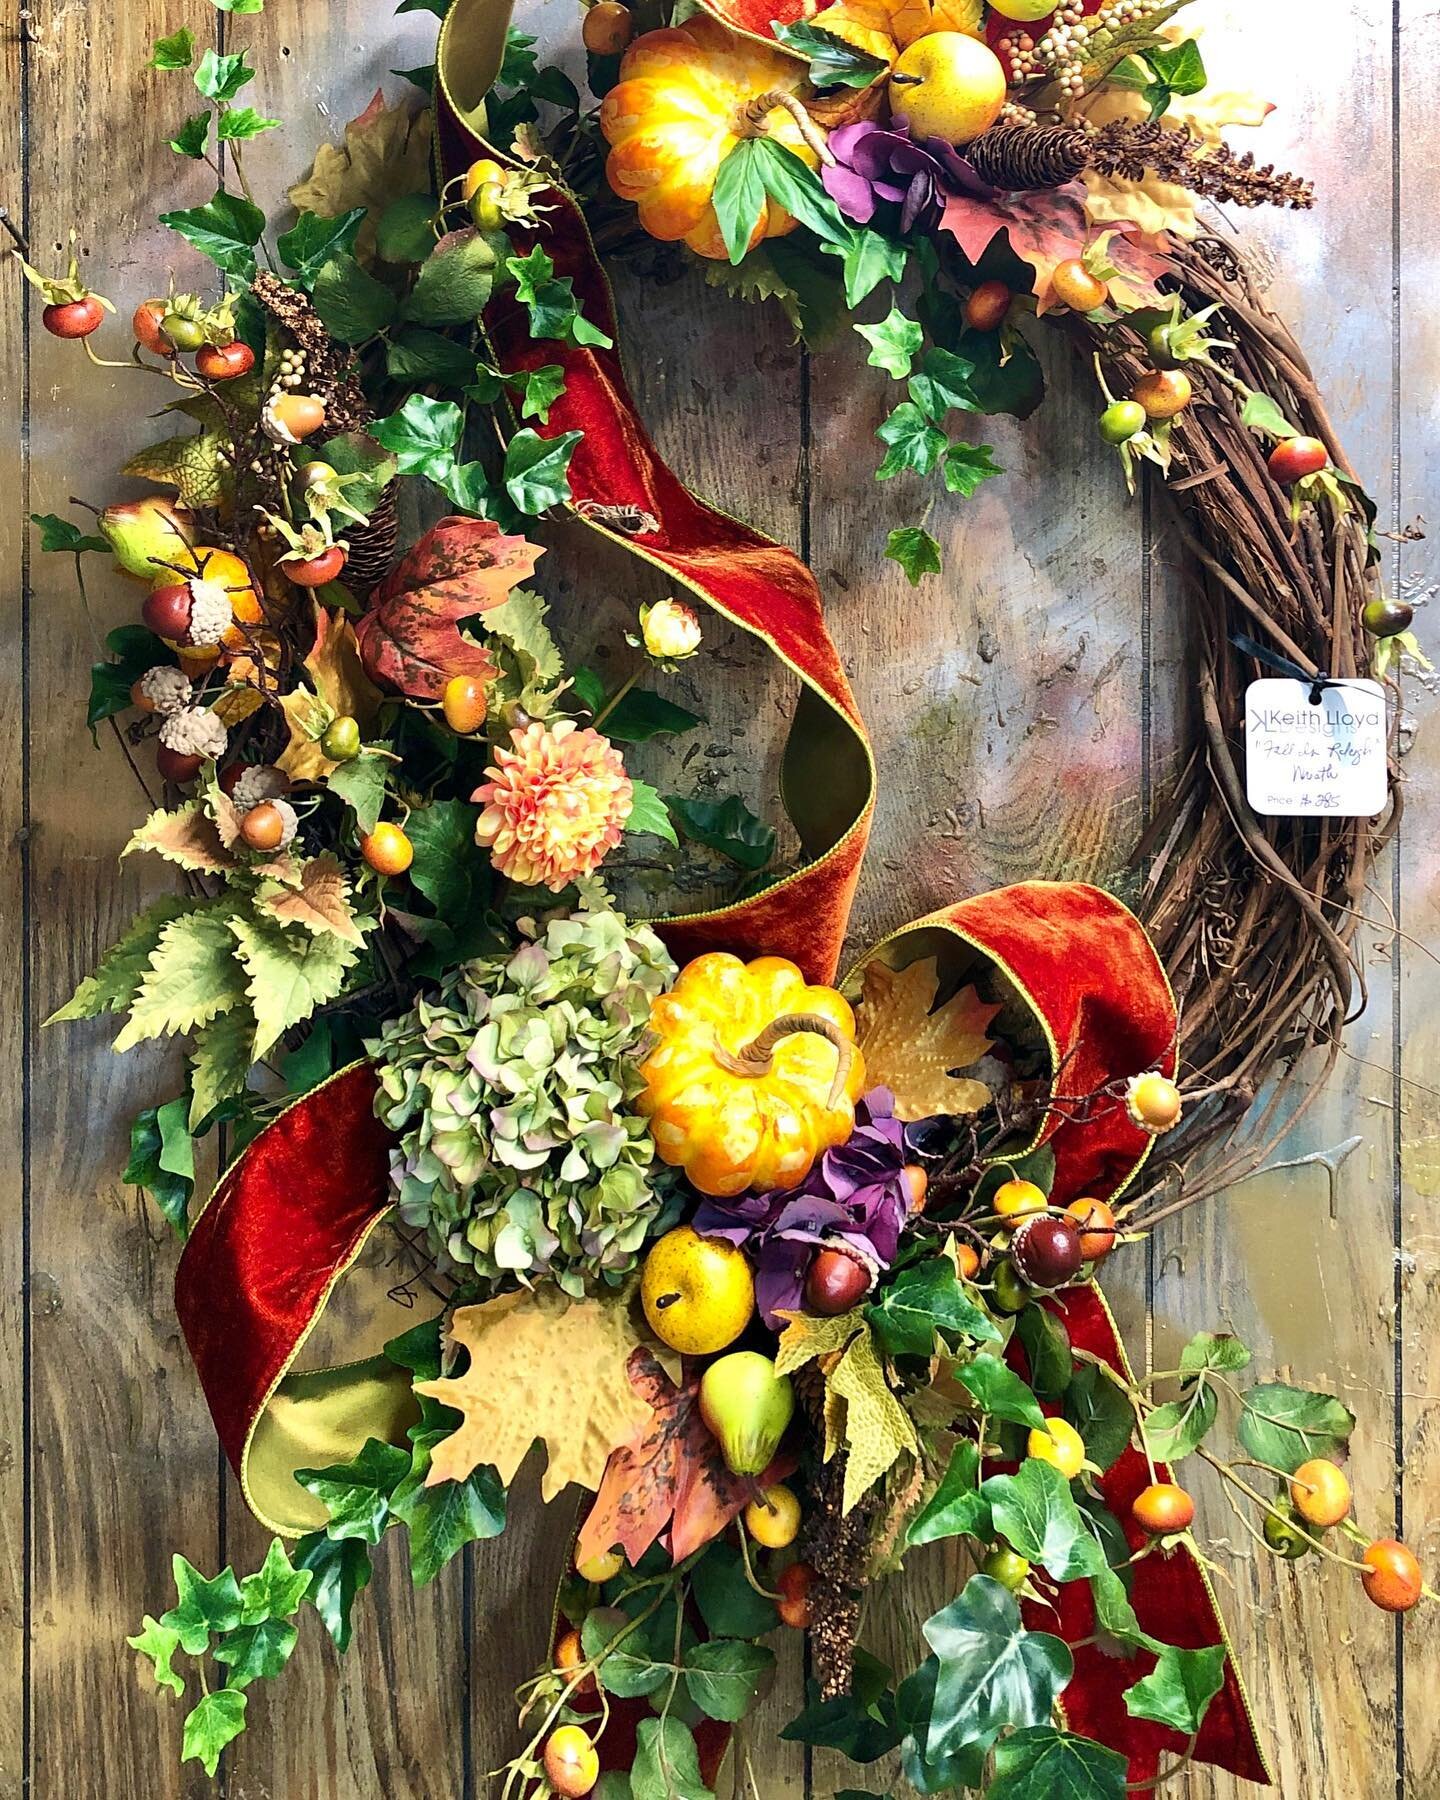 More beautiful Fall wreaths have arrived @lloydandlady boutiques!  Come make your selection today.
.
.
.
#wreath #wreathsforsale #fall #fallwreath #floraldesign #customfloraldesign #autumn #boutiqueshopping #boutique #shoplocal #shopsmall #shopraleig